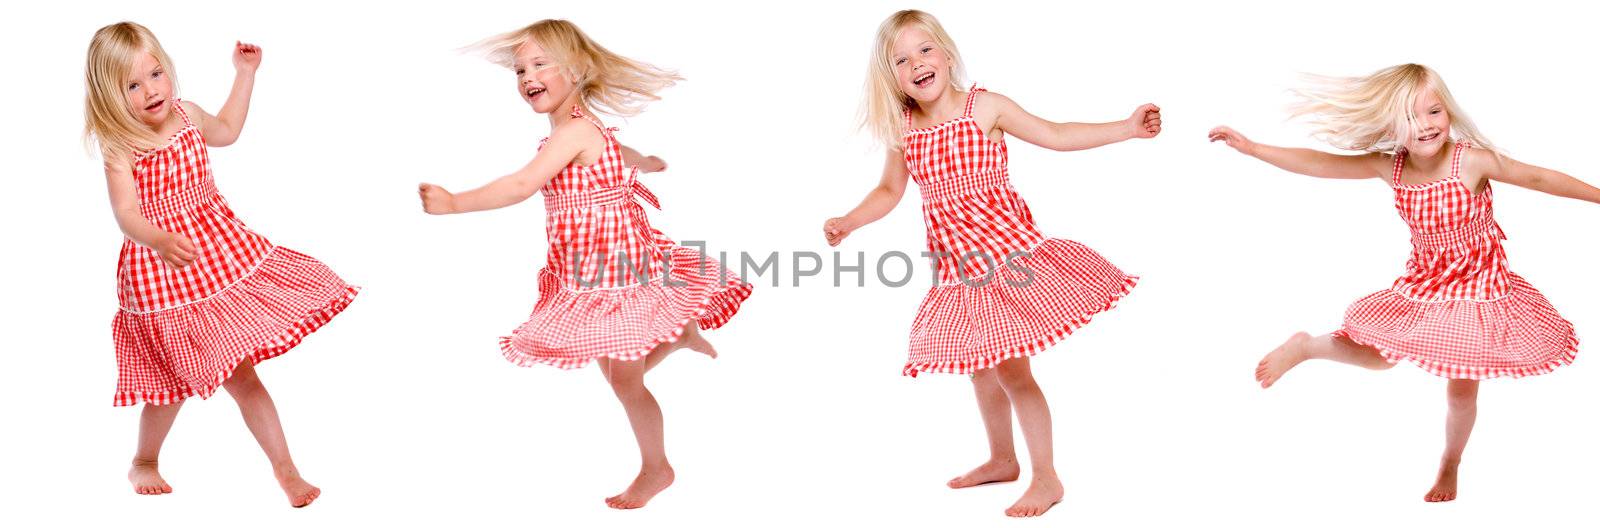 Collage of four photos of a little dancing girl